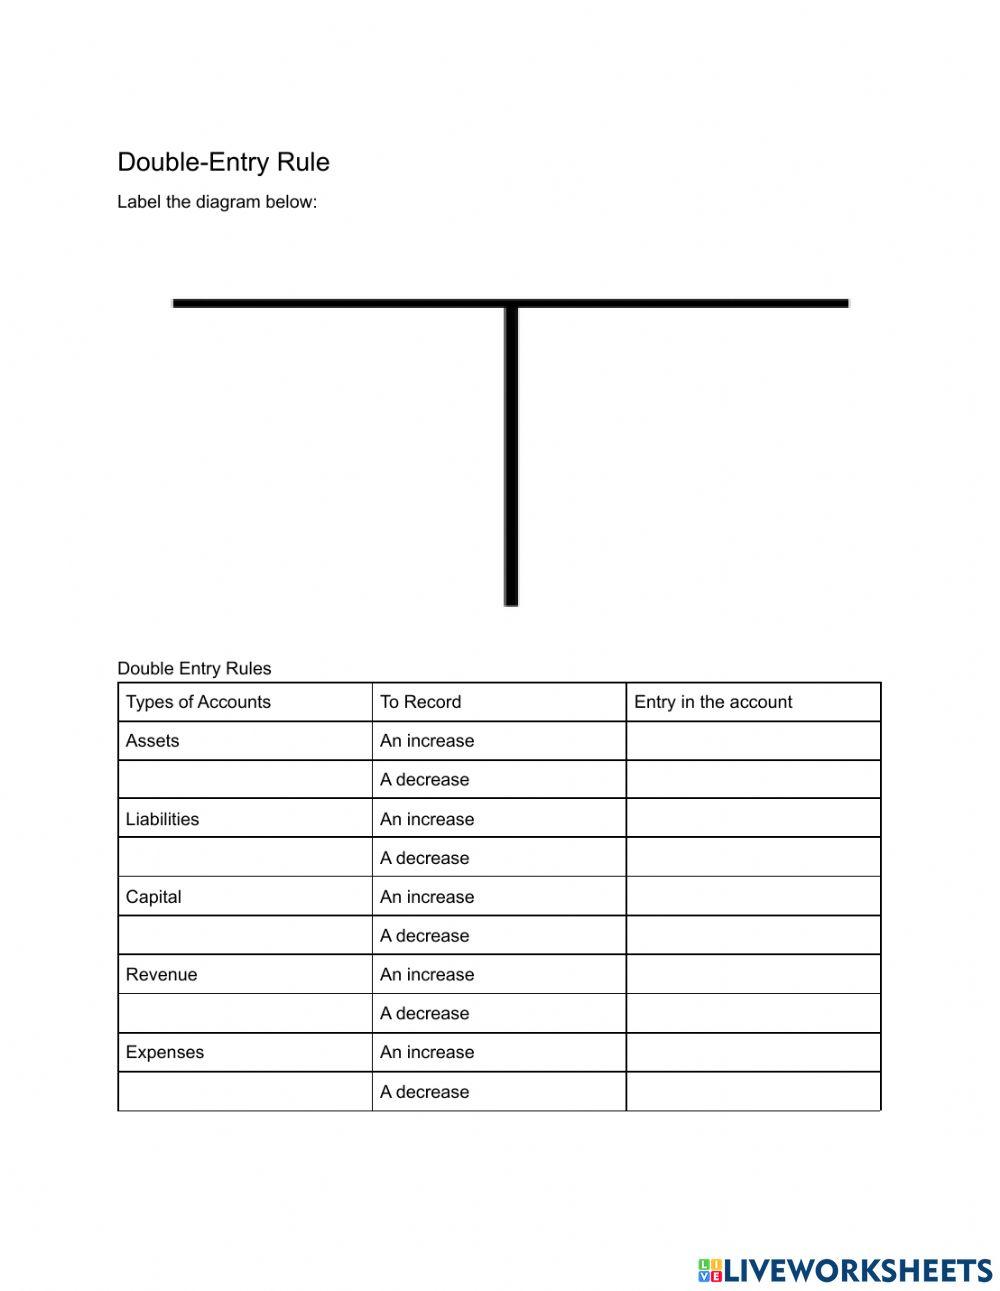 Double-Entry Rule